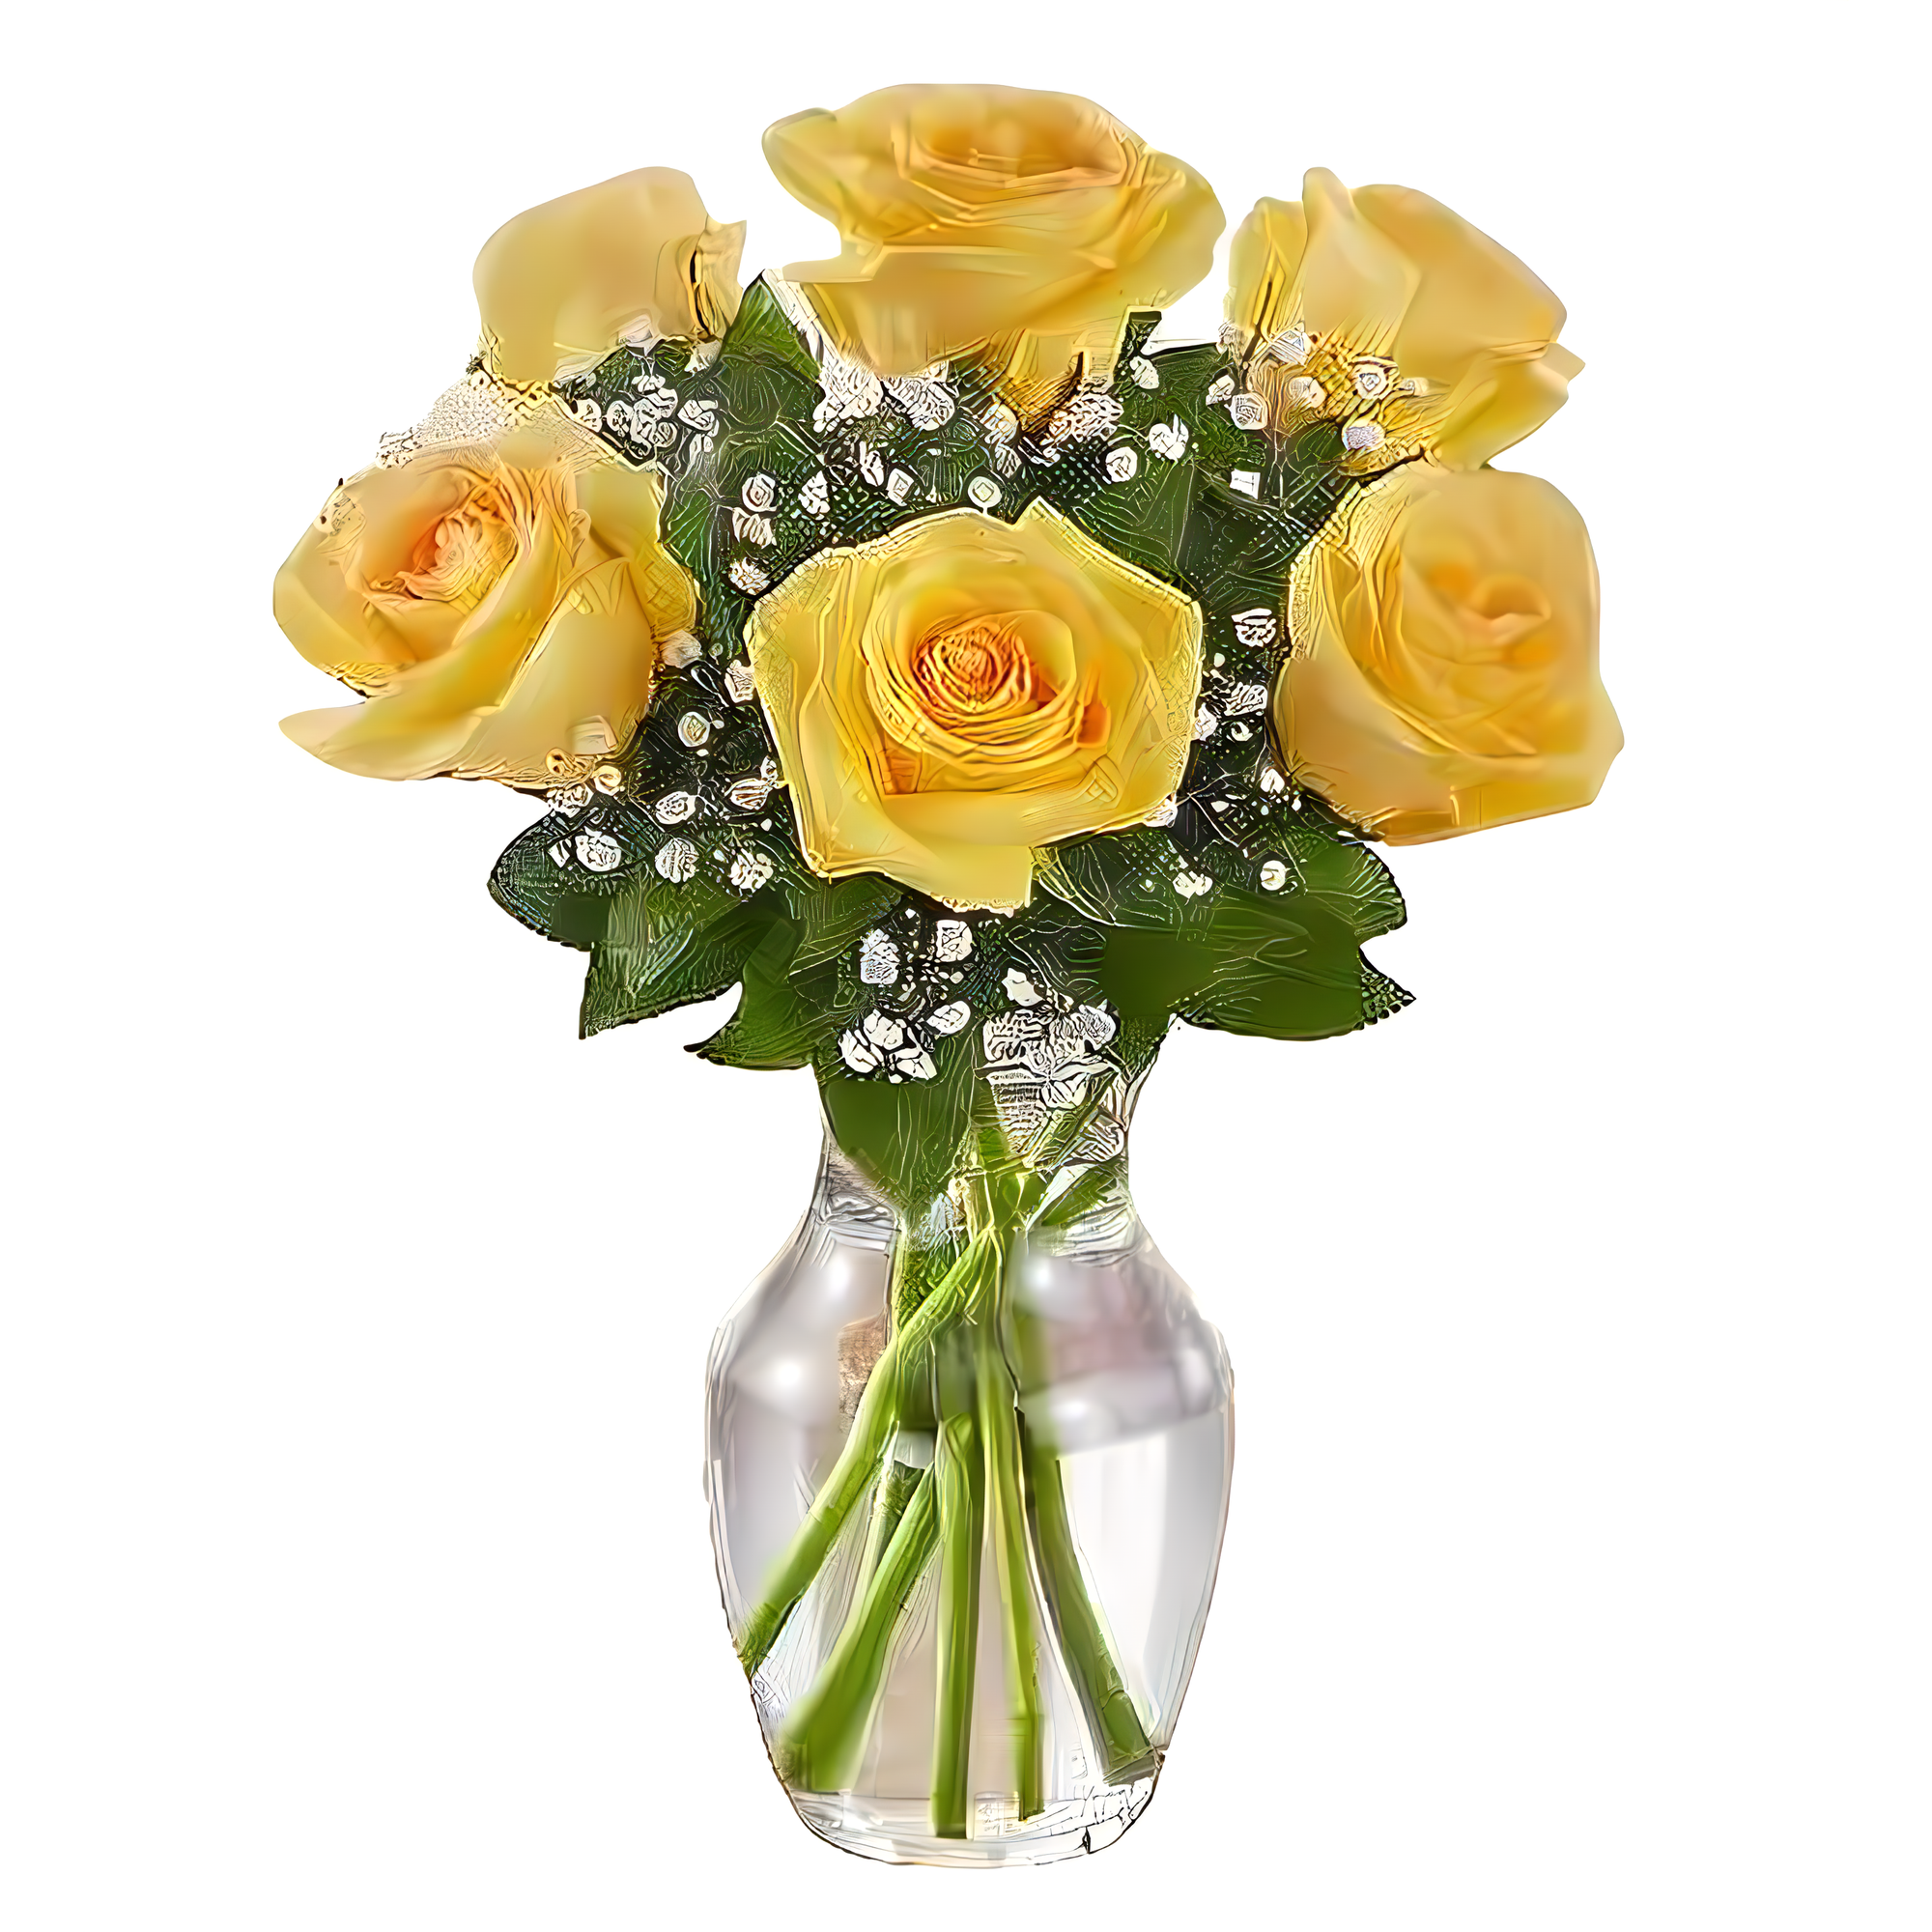 Manhattan Flower Delivery - Love's Embrace Roses Yellow - Roses